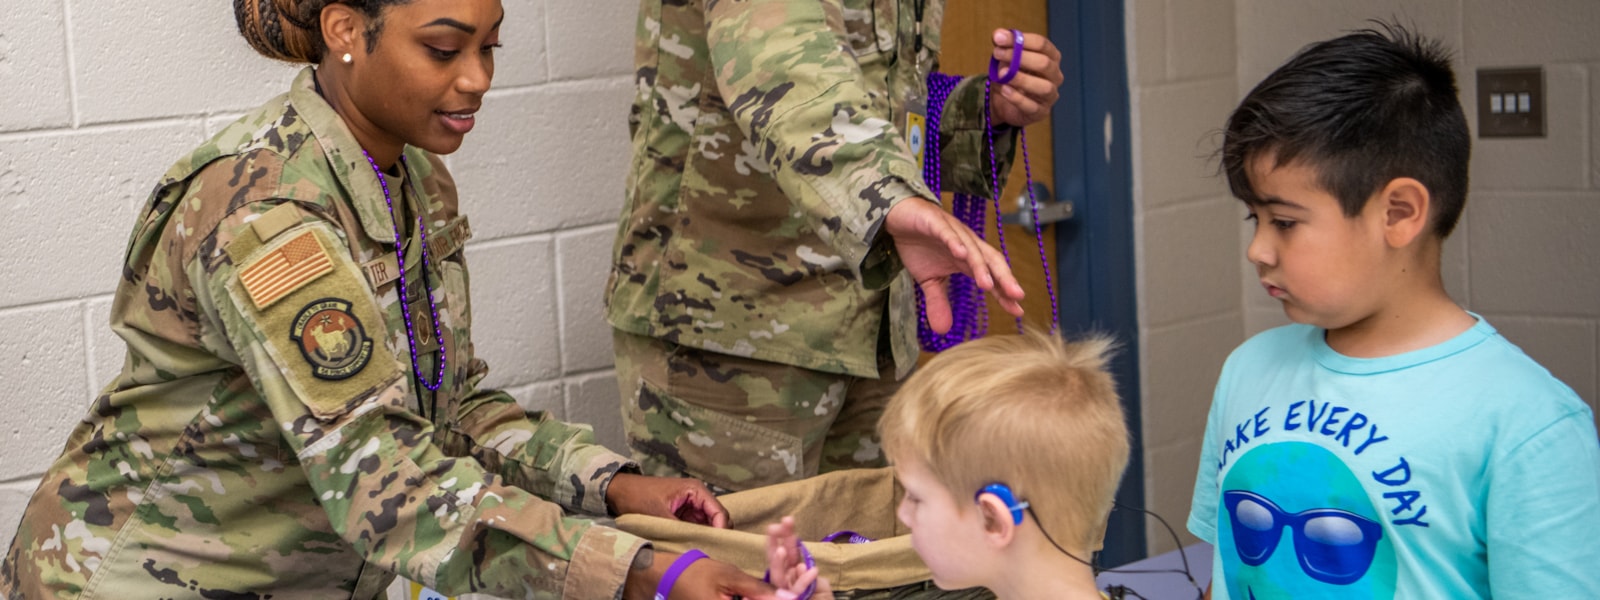 Military handing out purple beads  to children